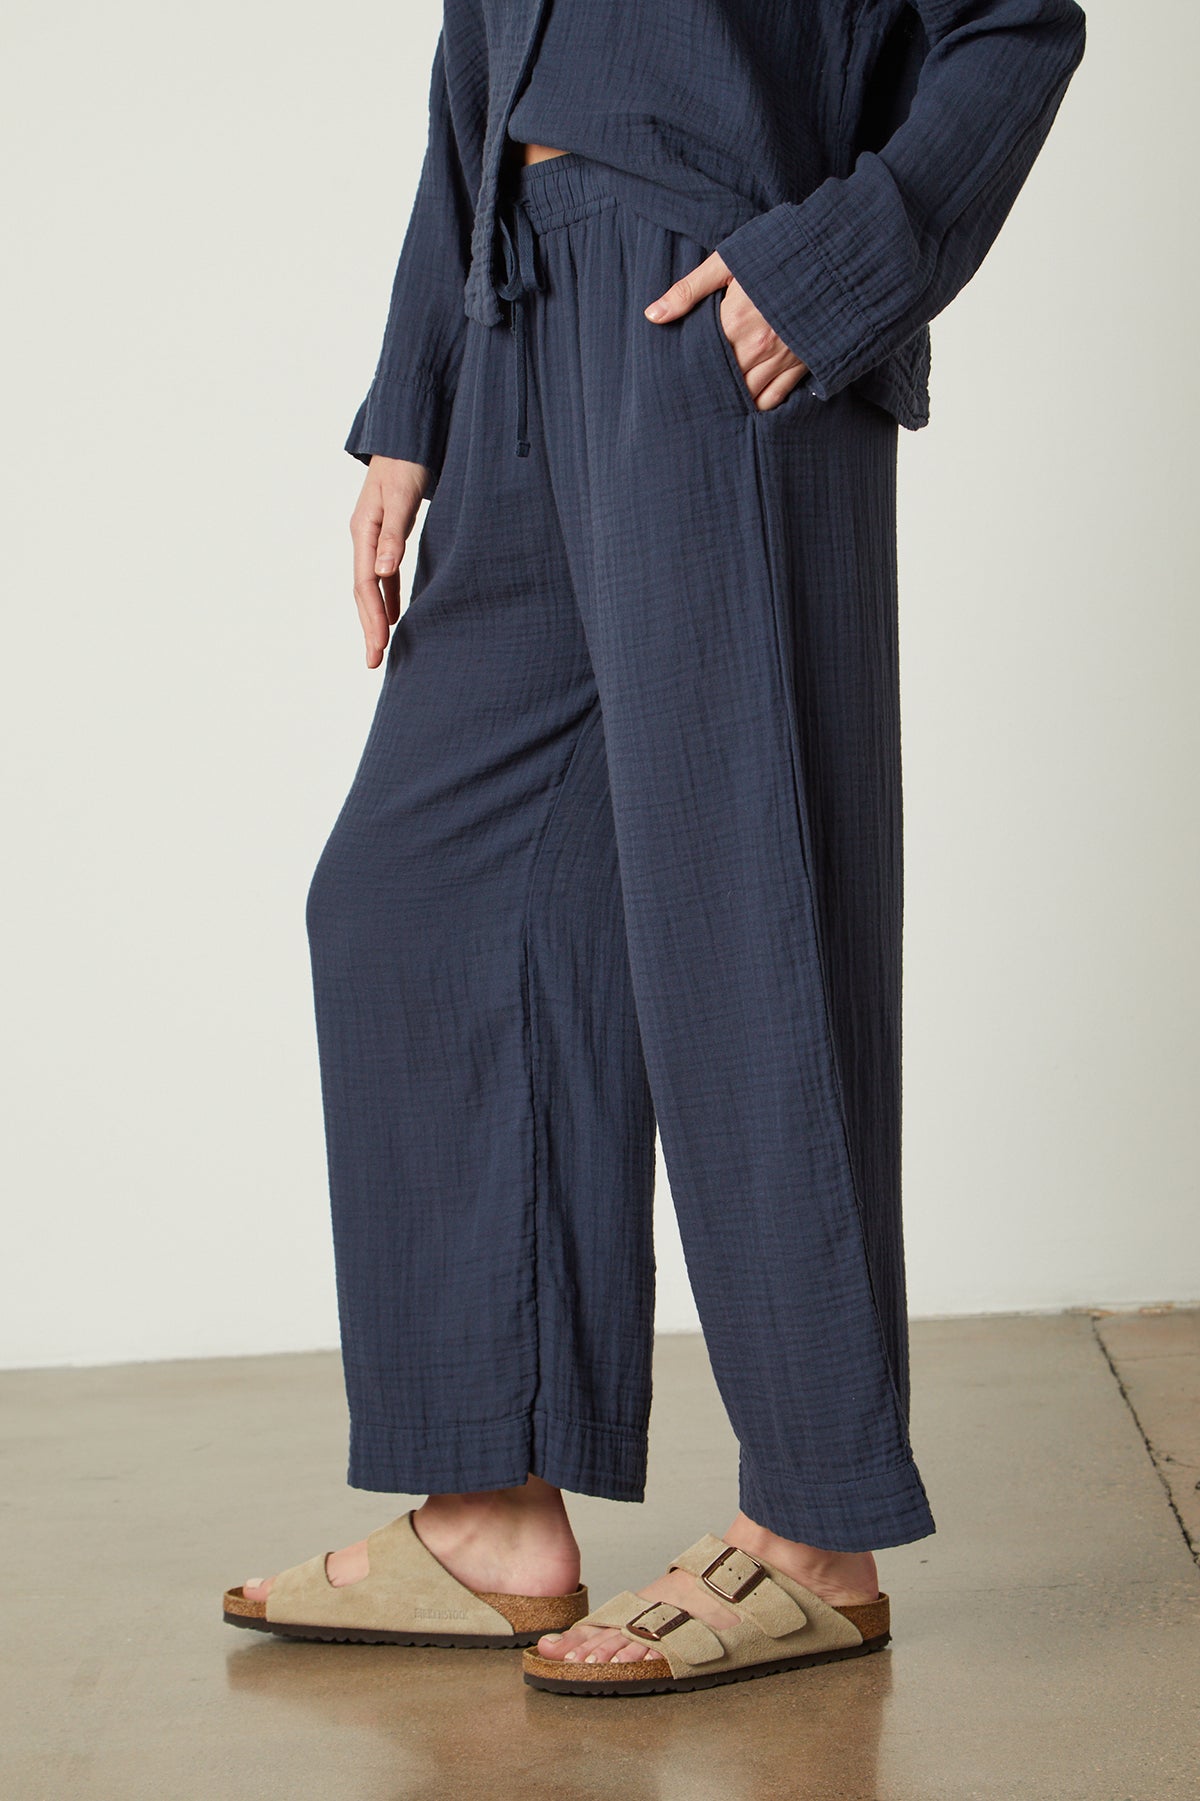 The model is wearing a navy wide leg PAJAMA PANT from Jenny Graham Home and sandals.-25519563276481